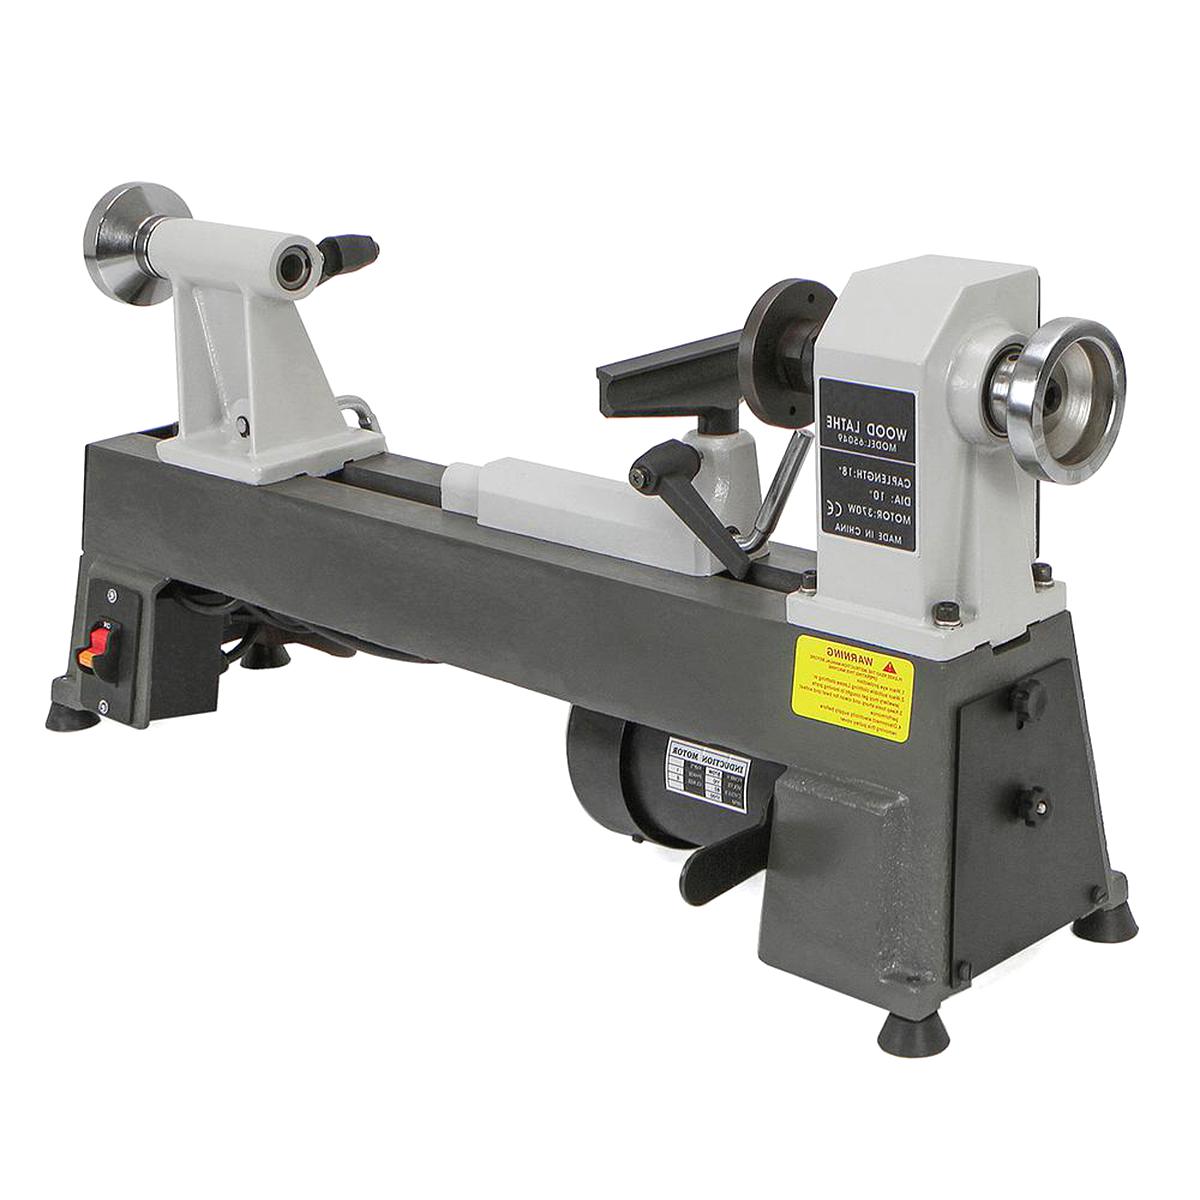 wood lathe for sale in uk 66 second-hand wood lathes